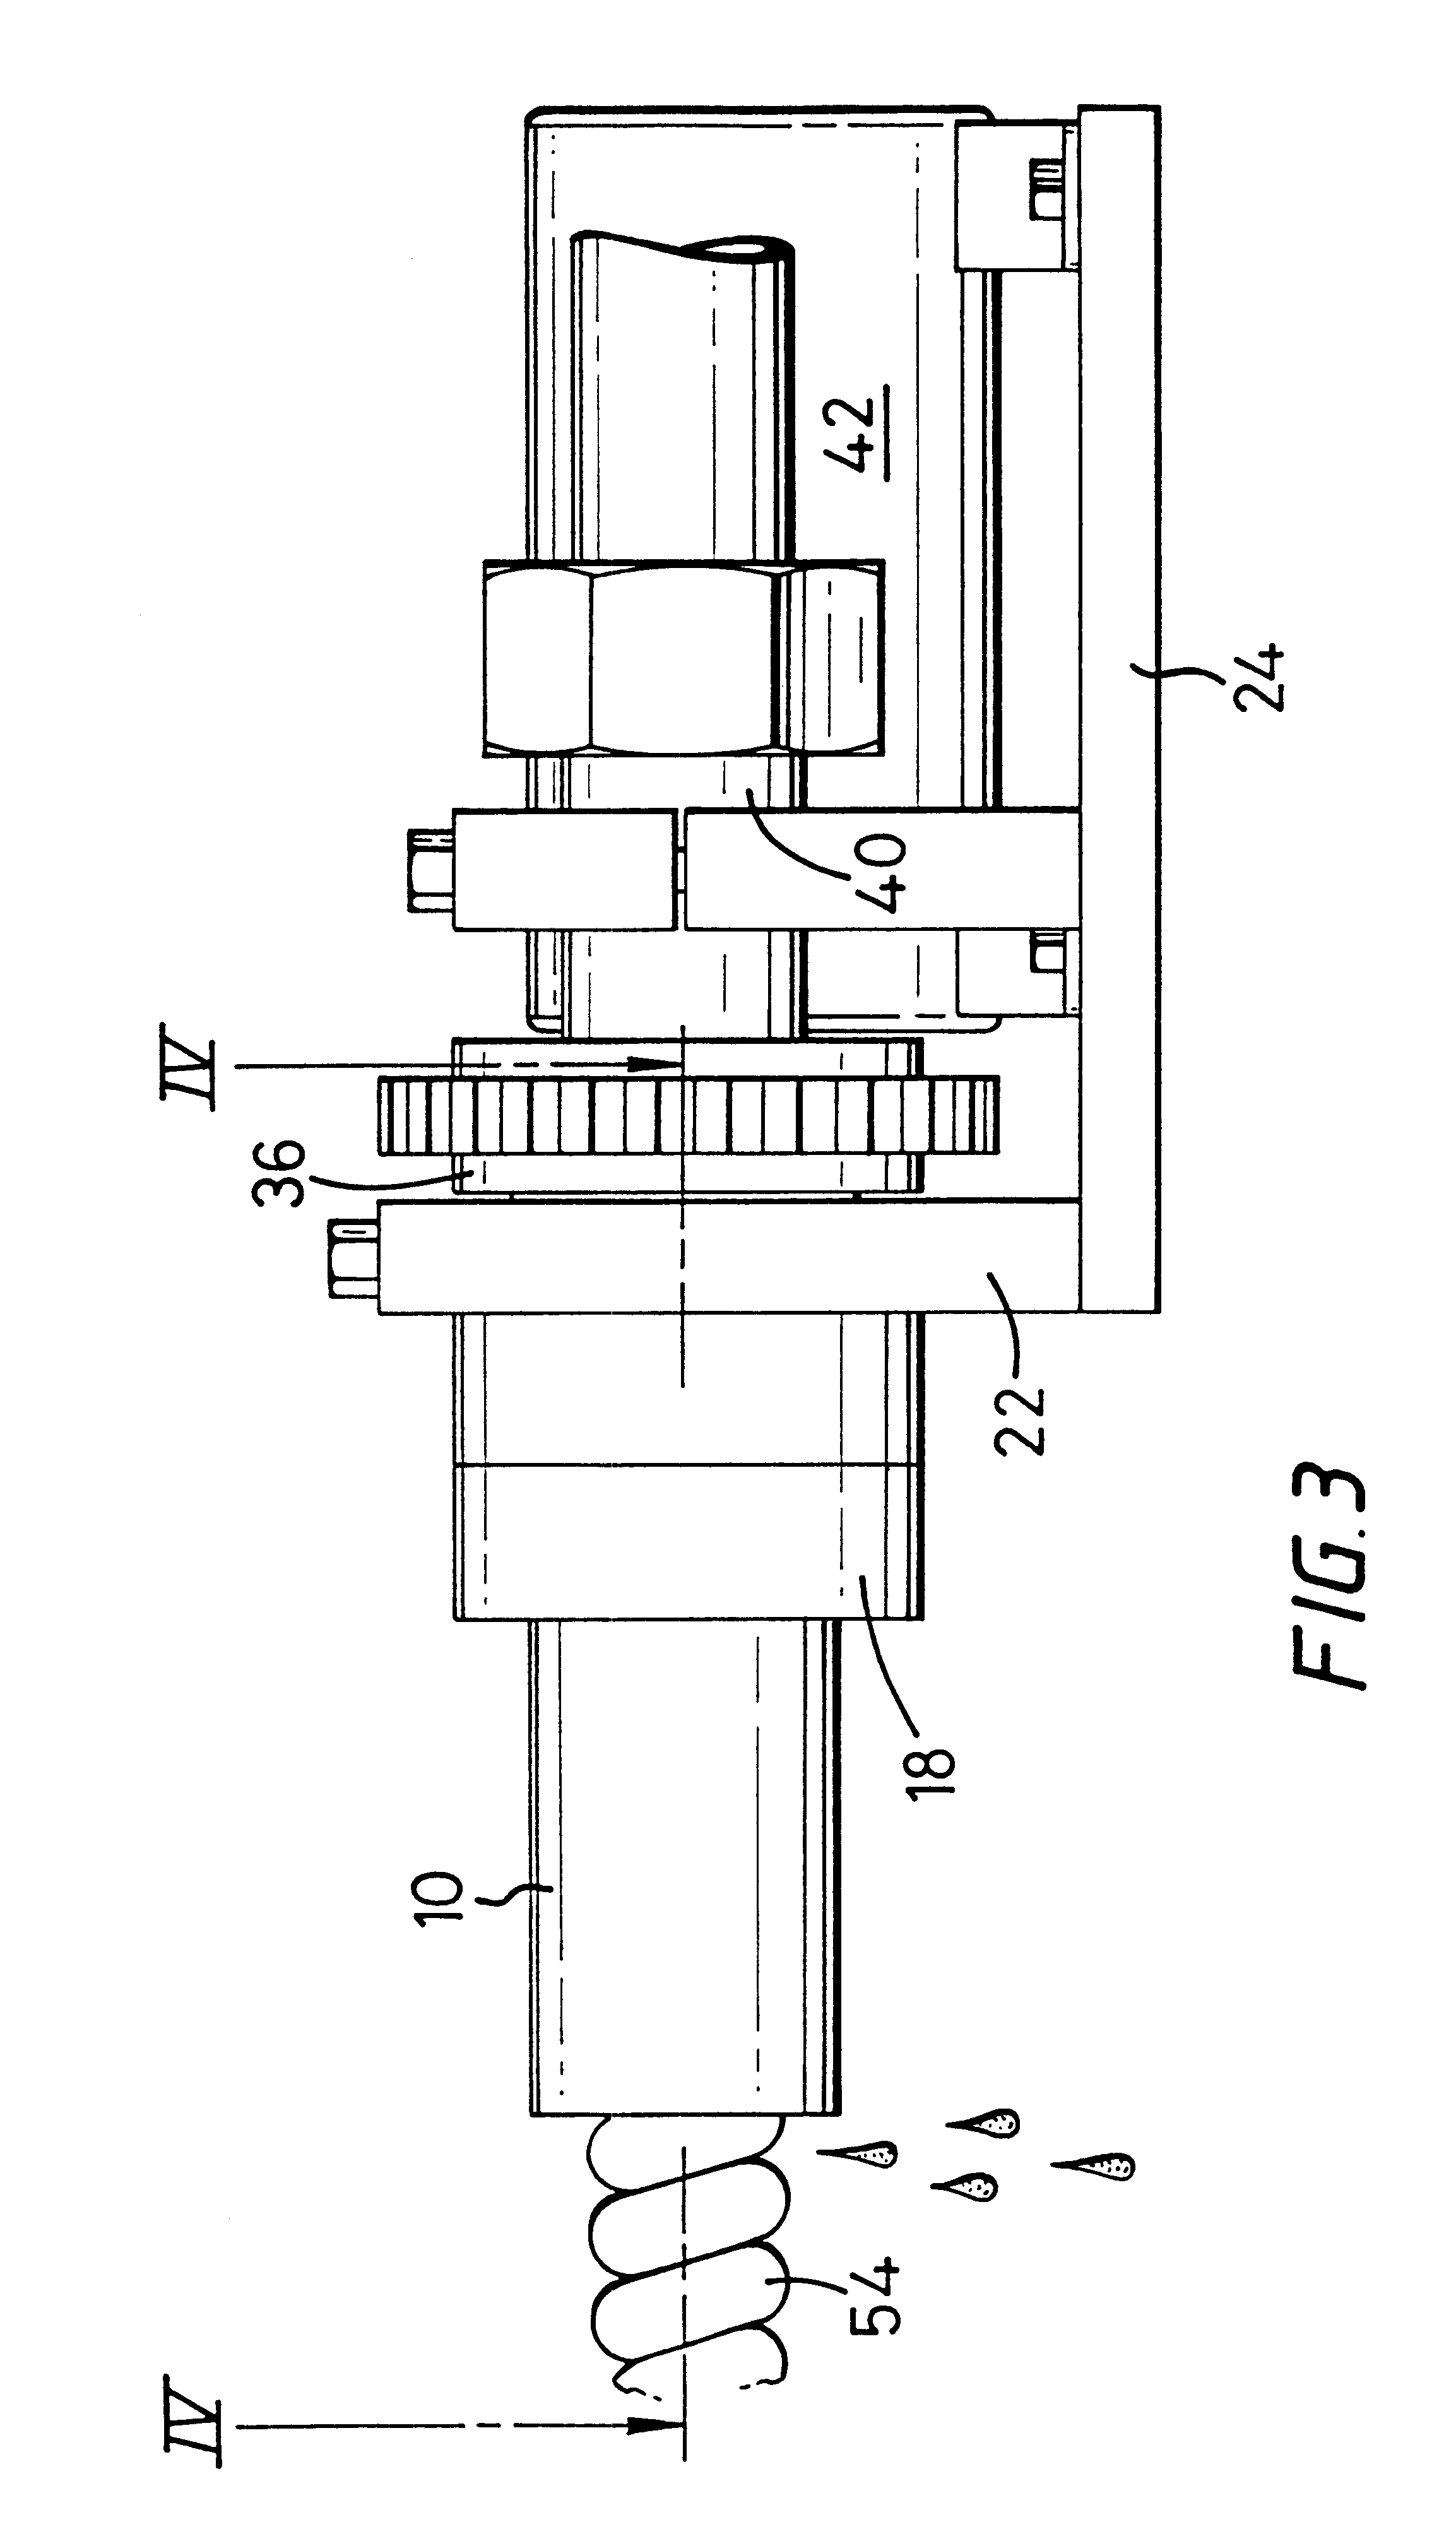 Method and apparatus for making an helical food product